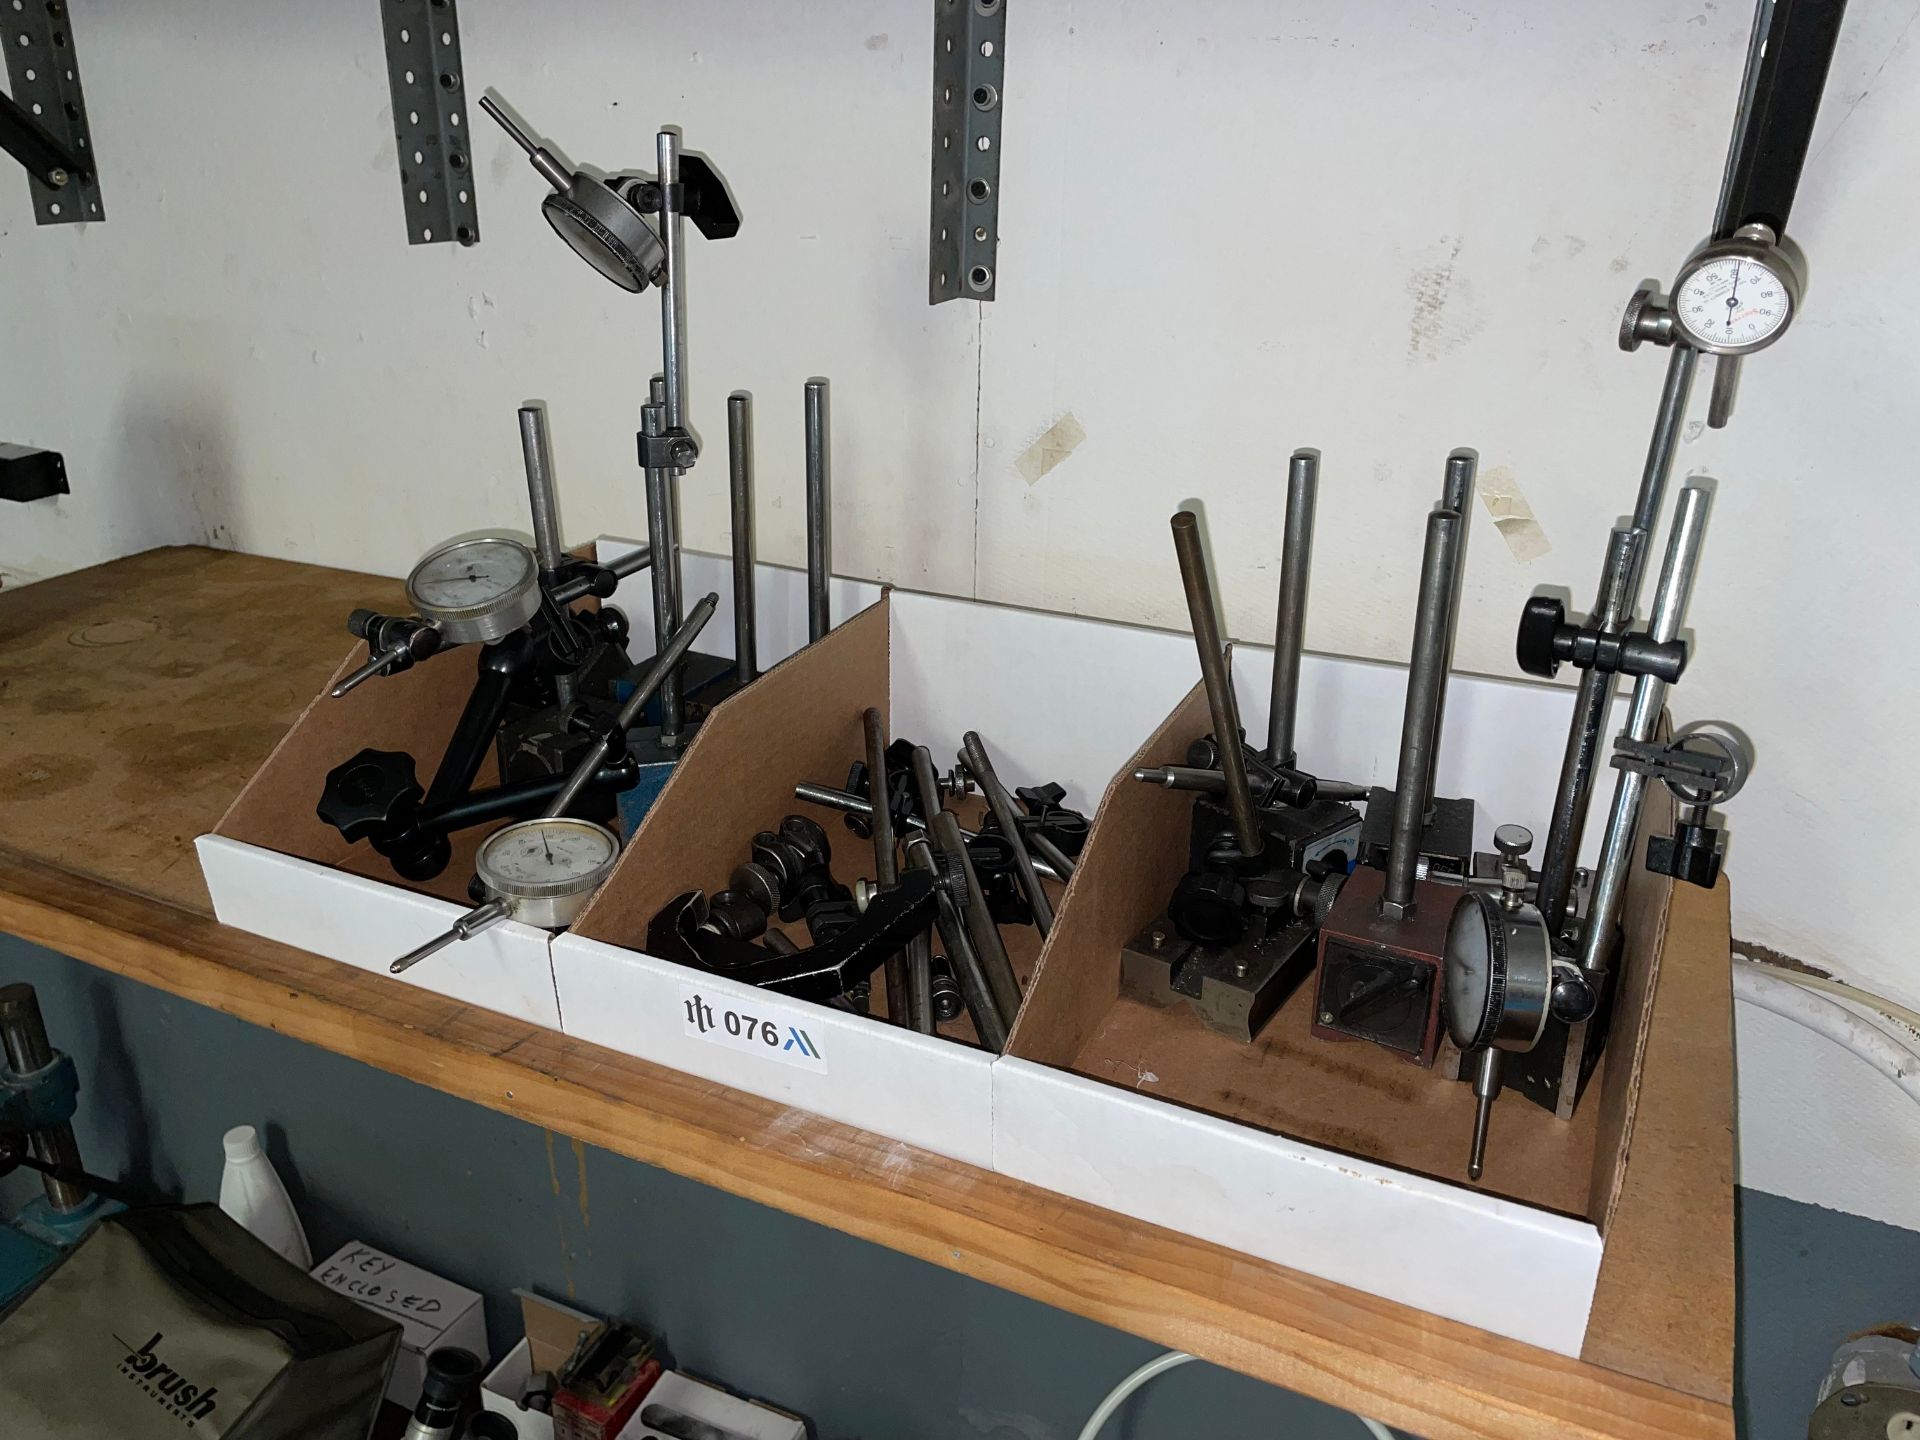 Lot with Various Dial Indicators and Gage Stands - Image 2 of 3